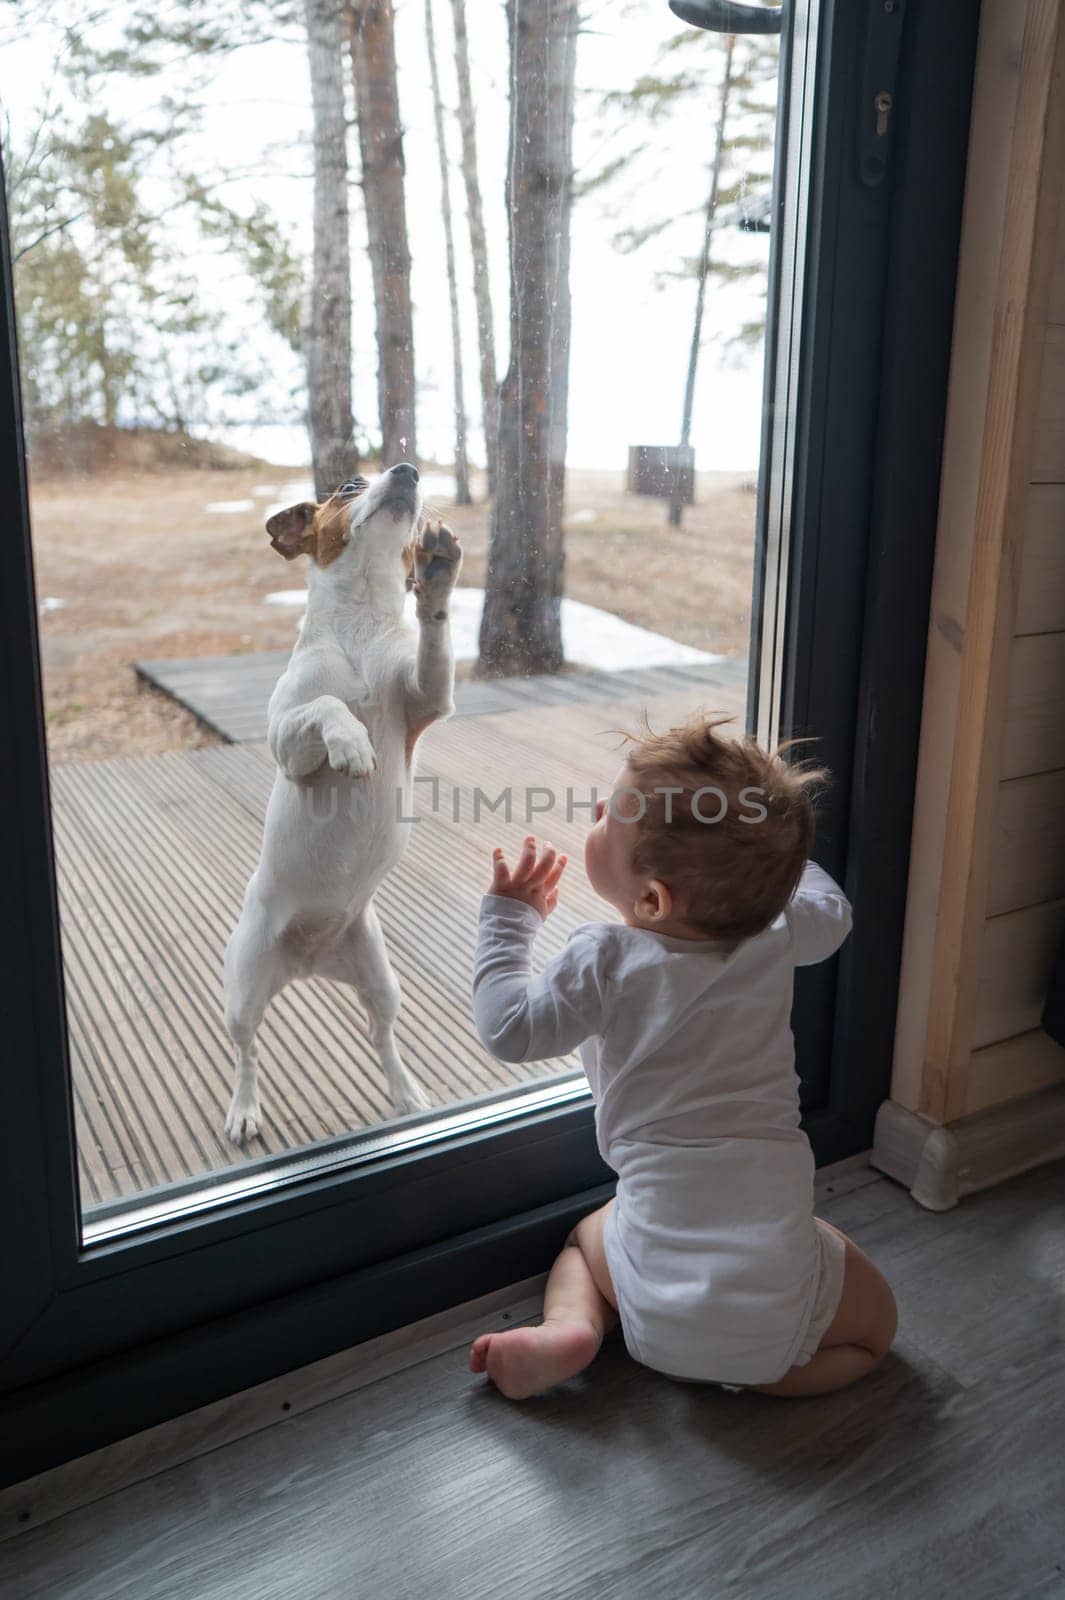 The dog stands at the patio window and knocks his paw on the glass towards the standing baby boy from the side. Vertical photo